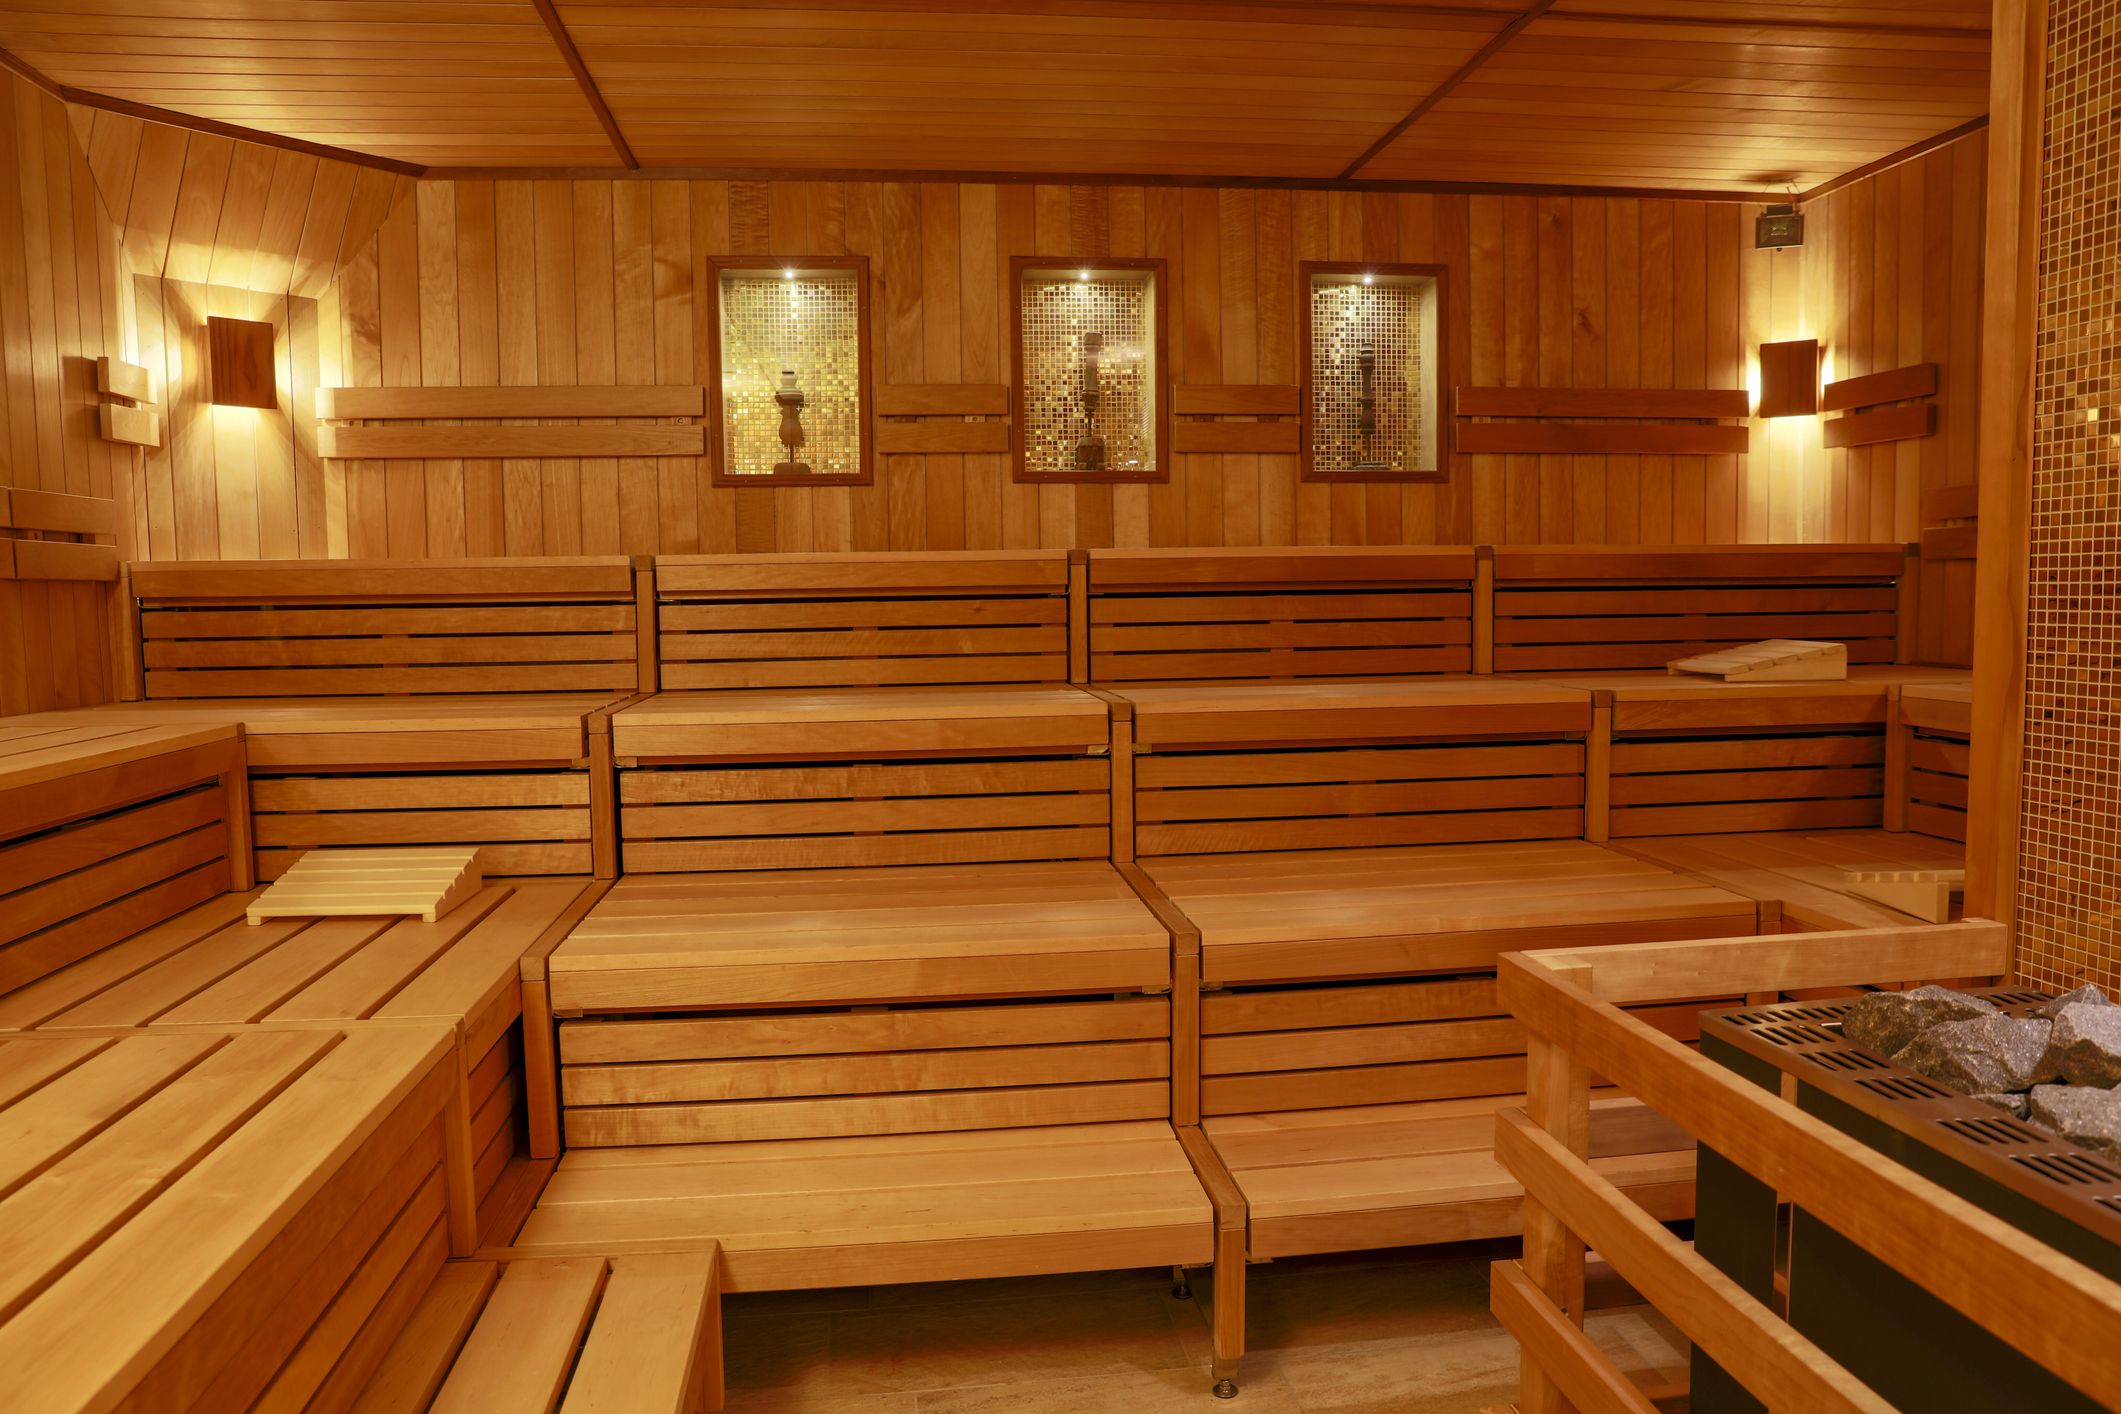 Sauna use may lower risk for stroke 